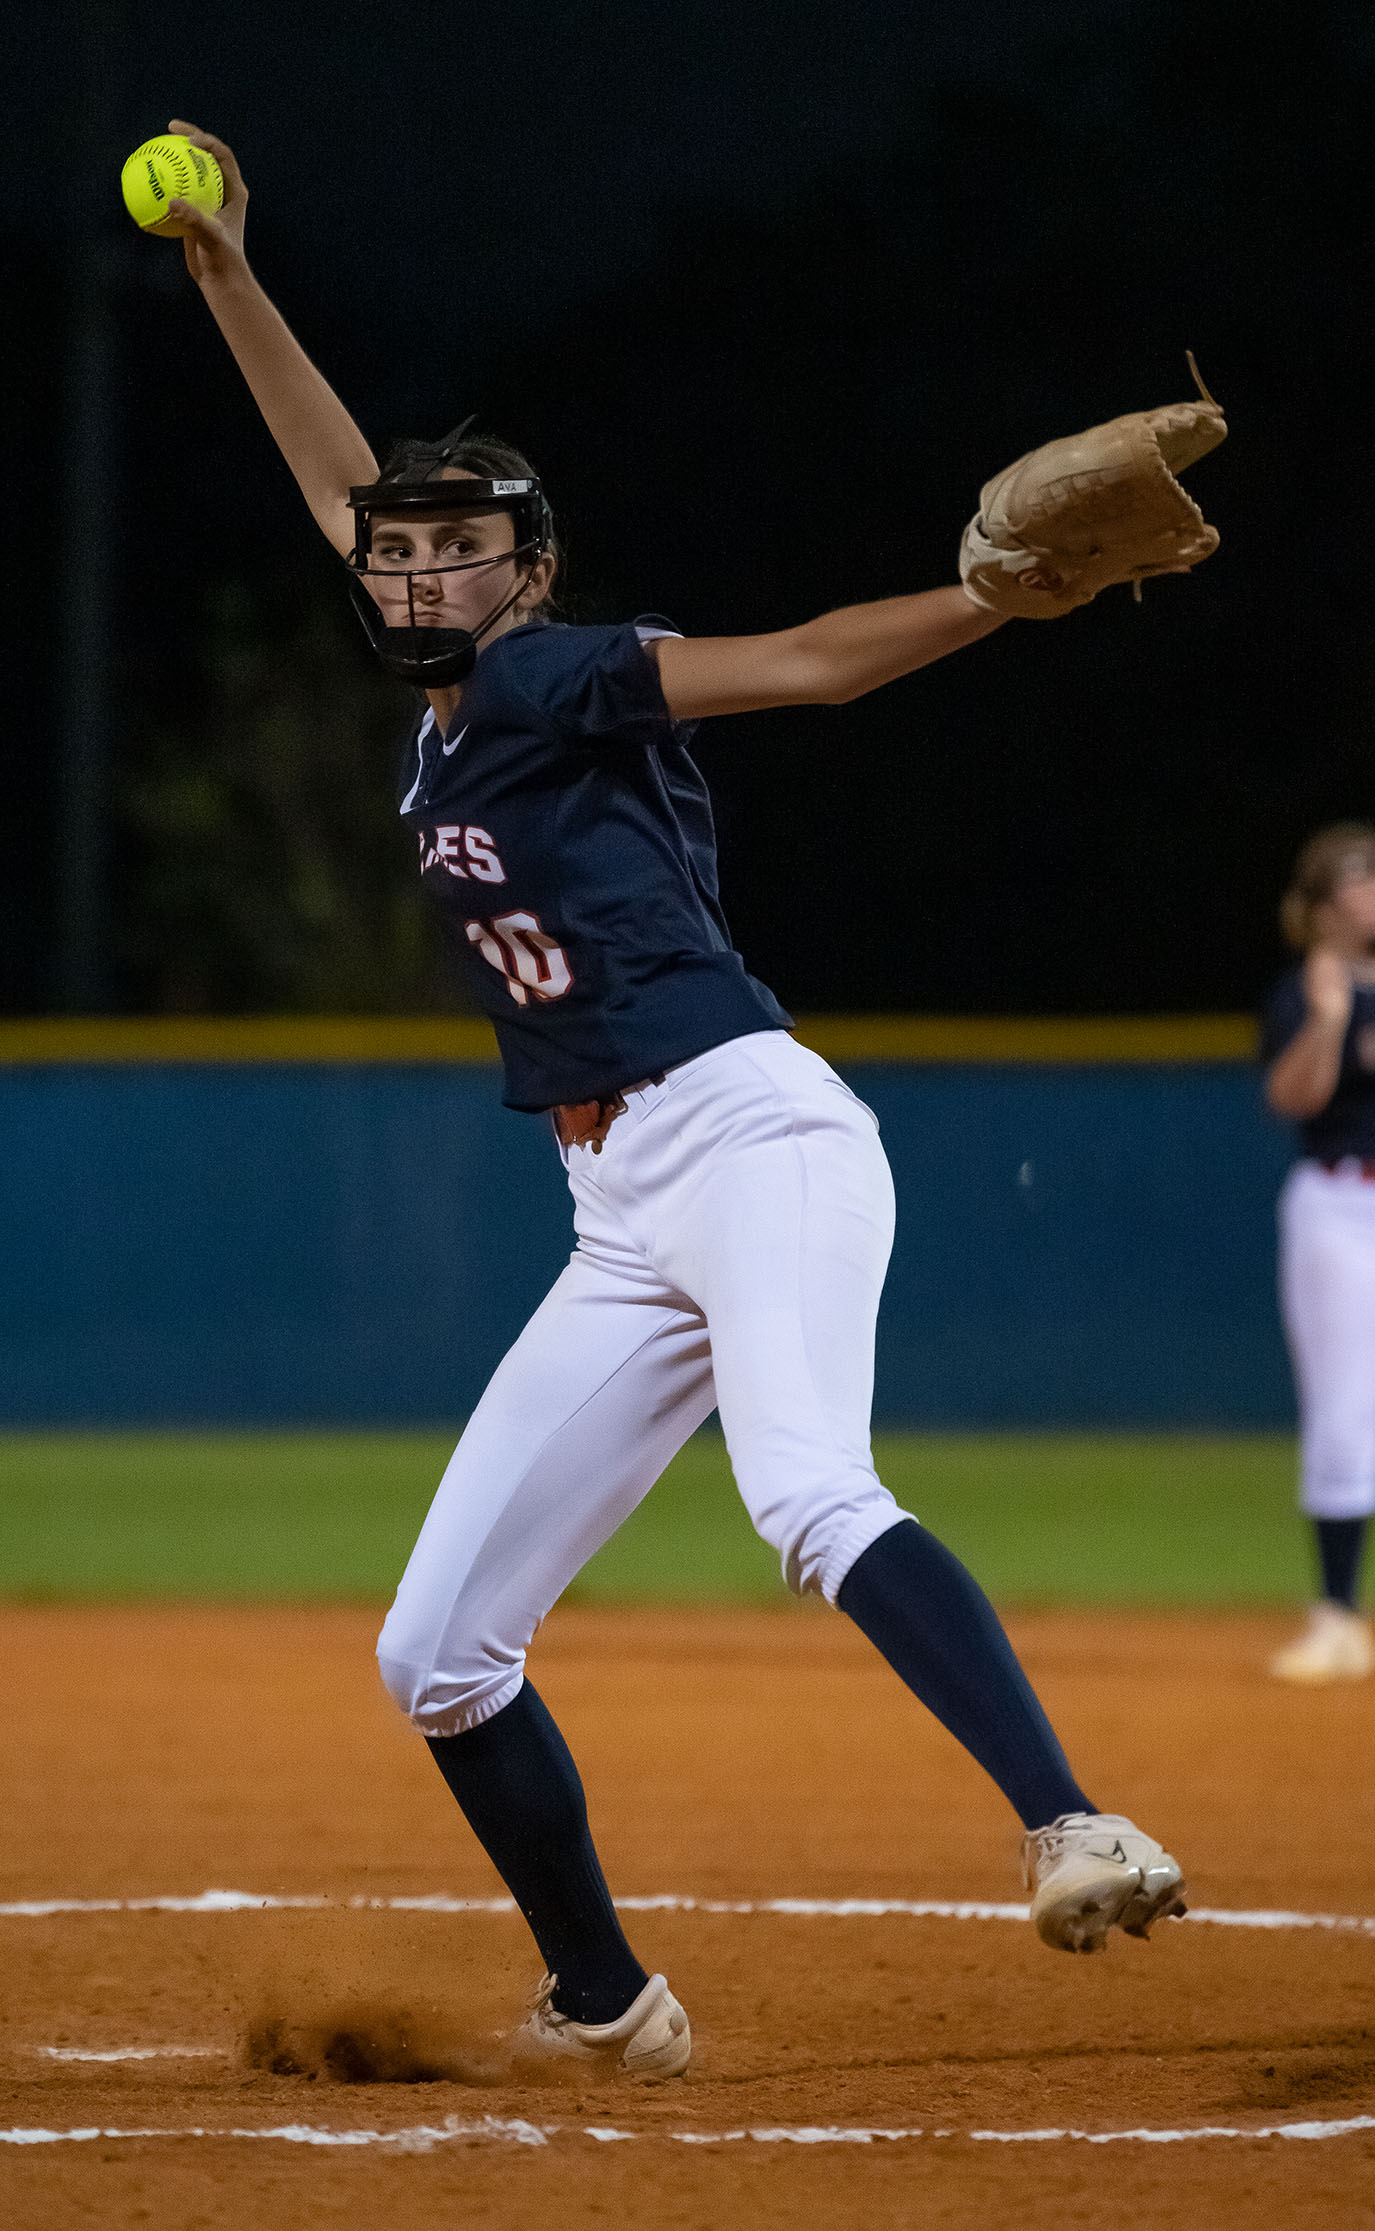 Springstead, 10, Ava Miller, pitched against Hernando Thursday in a home game. Photo by JOE DiCRISTOFALO